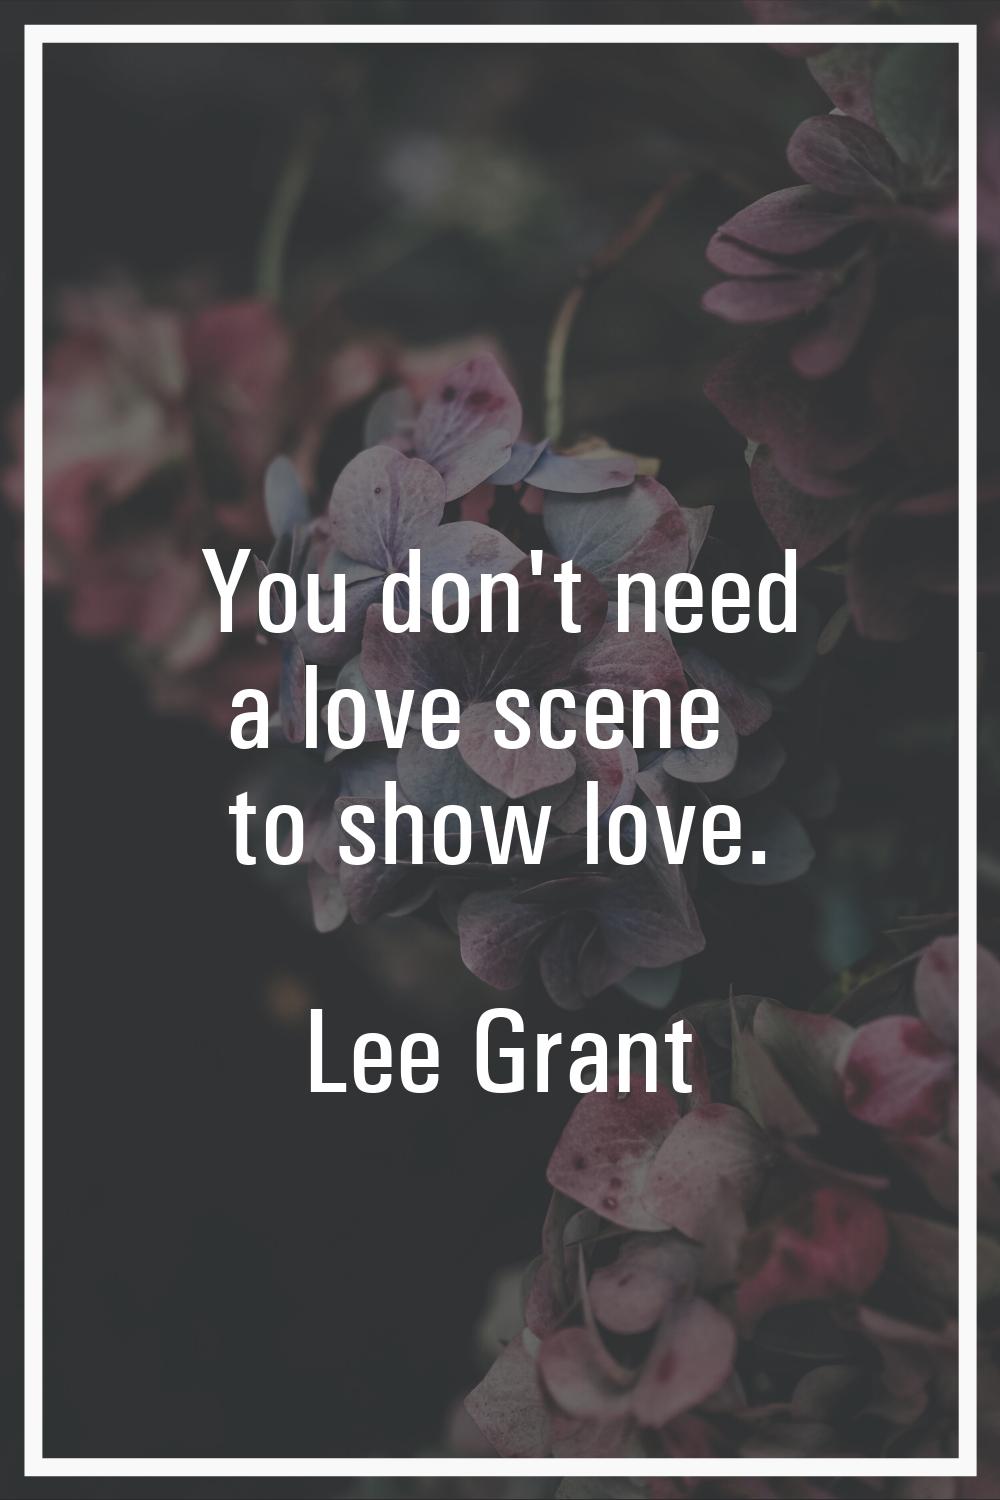 You don't need a love scene to show love.